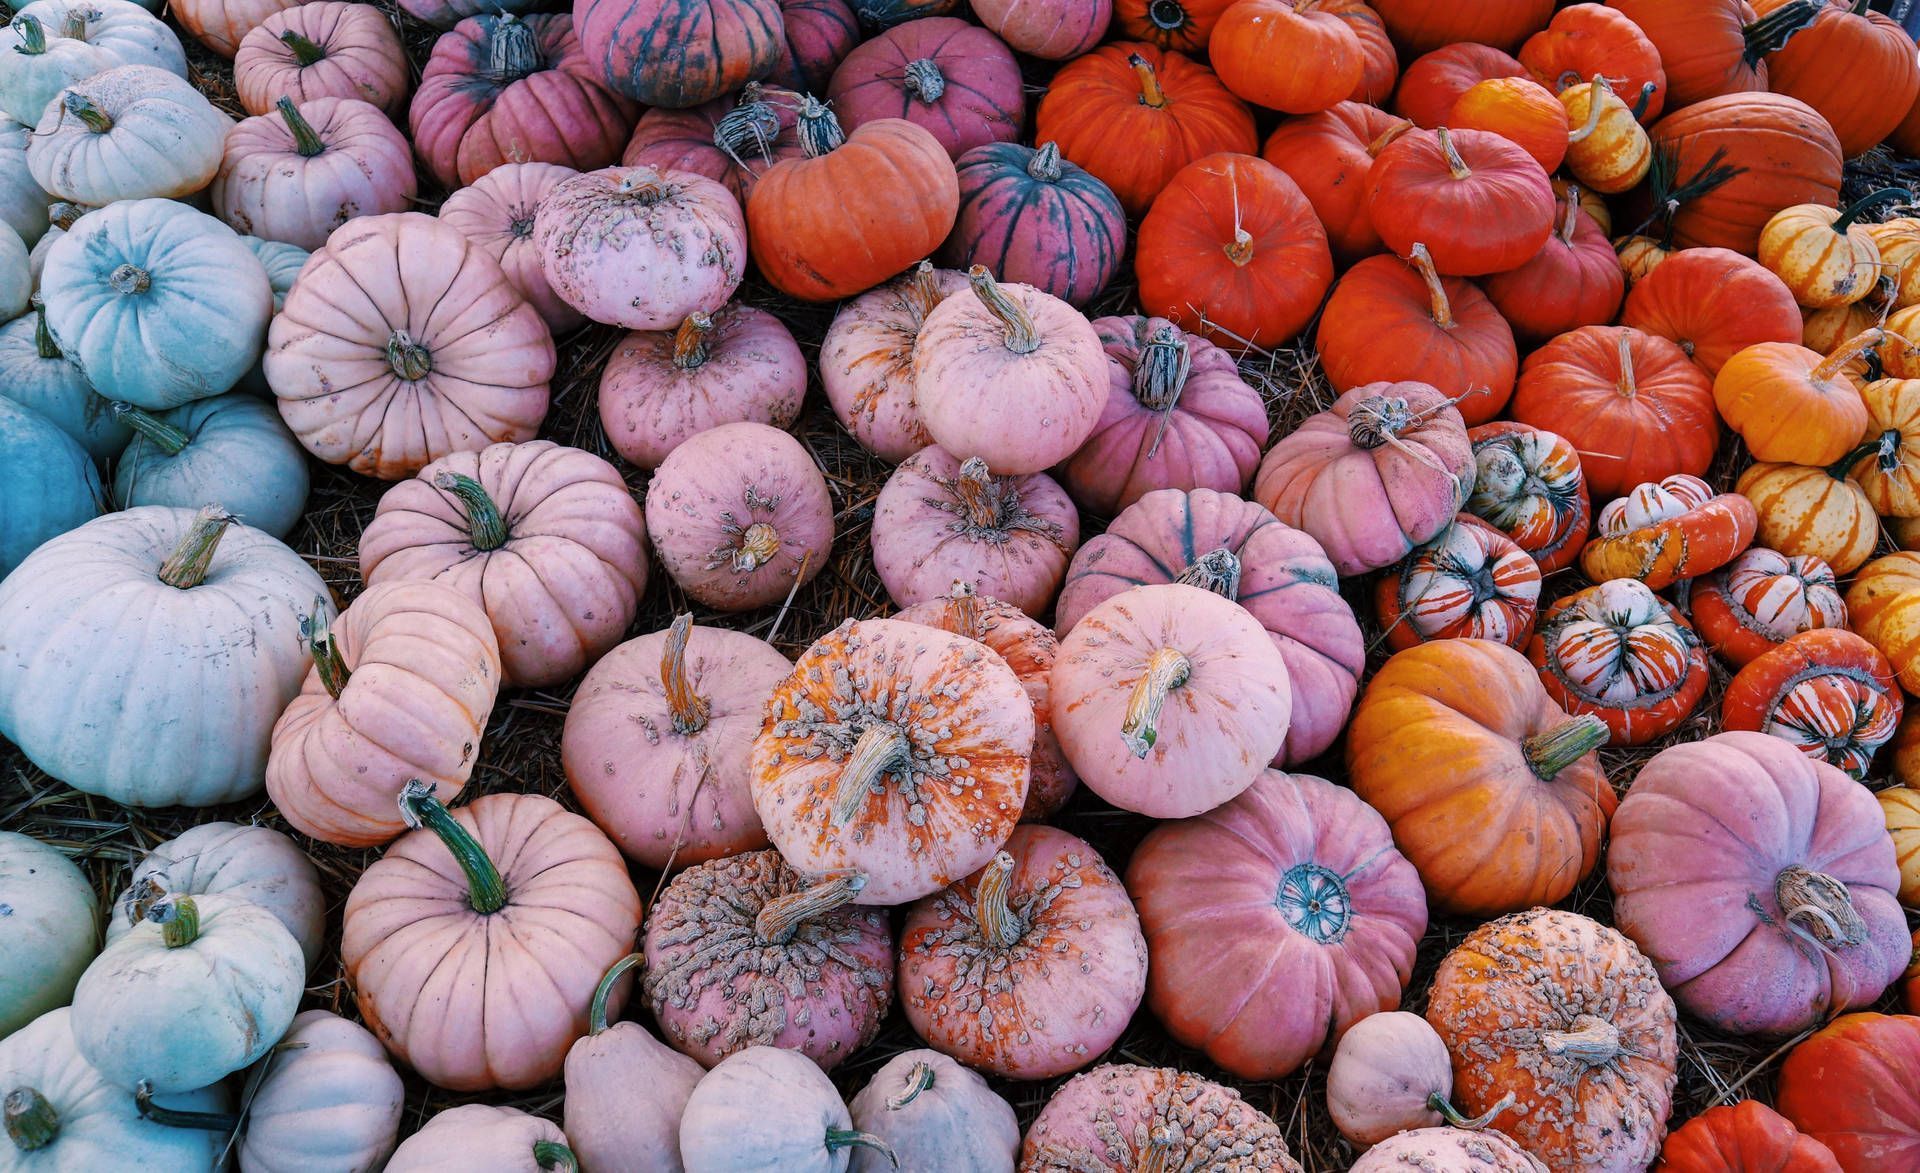 A colorful display of pumpkins in different colors - Pumpkin